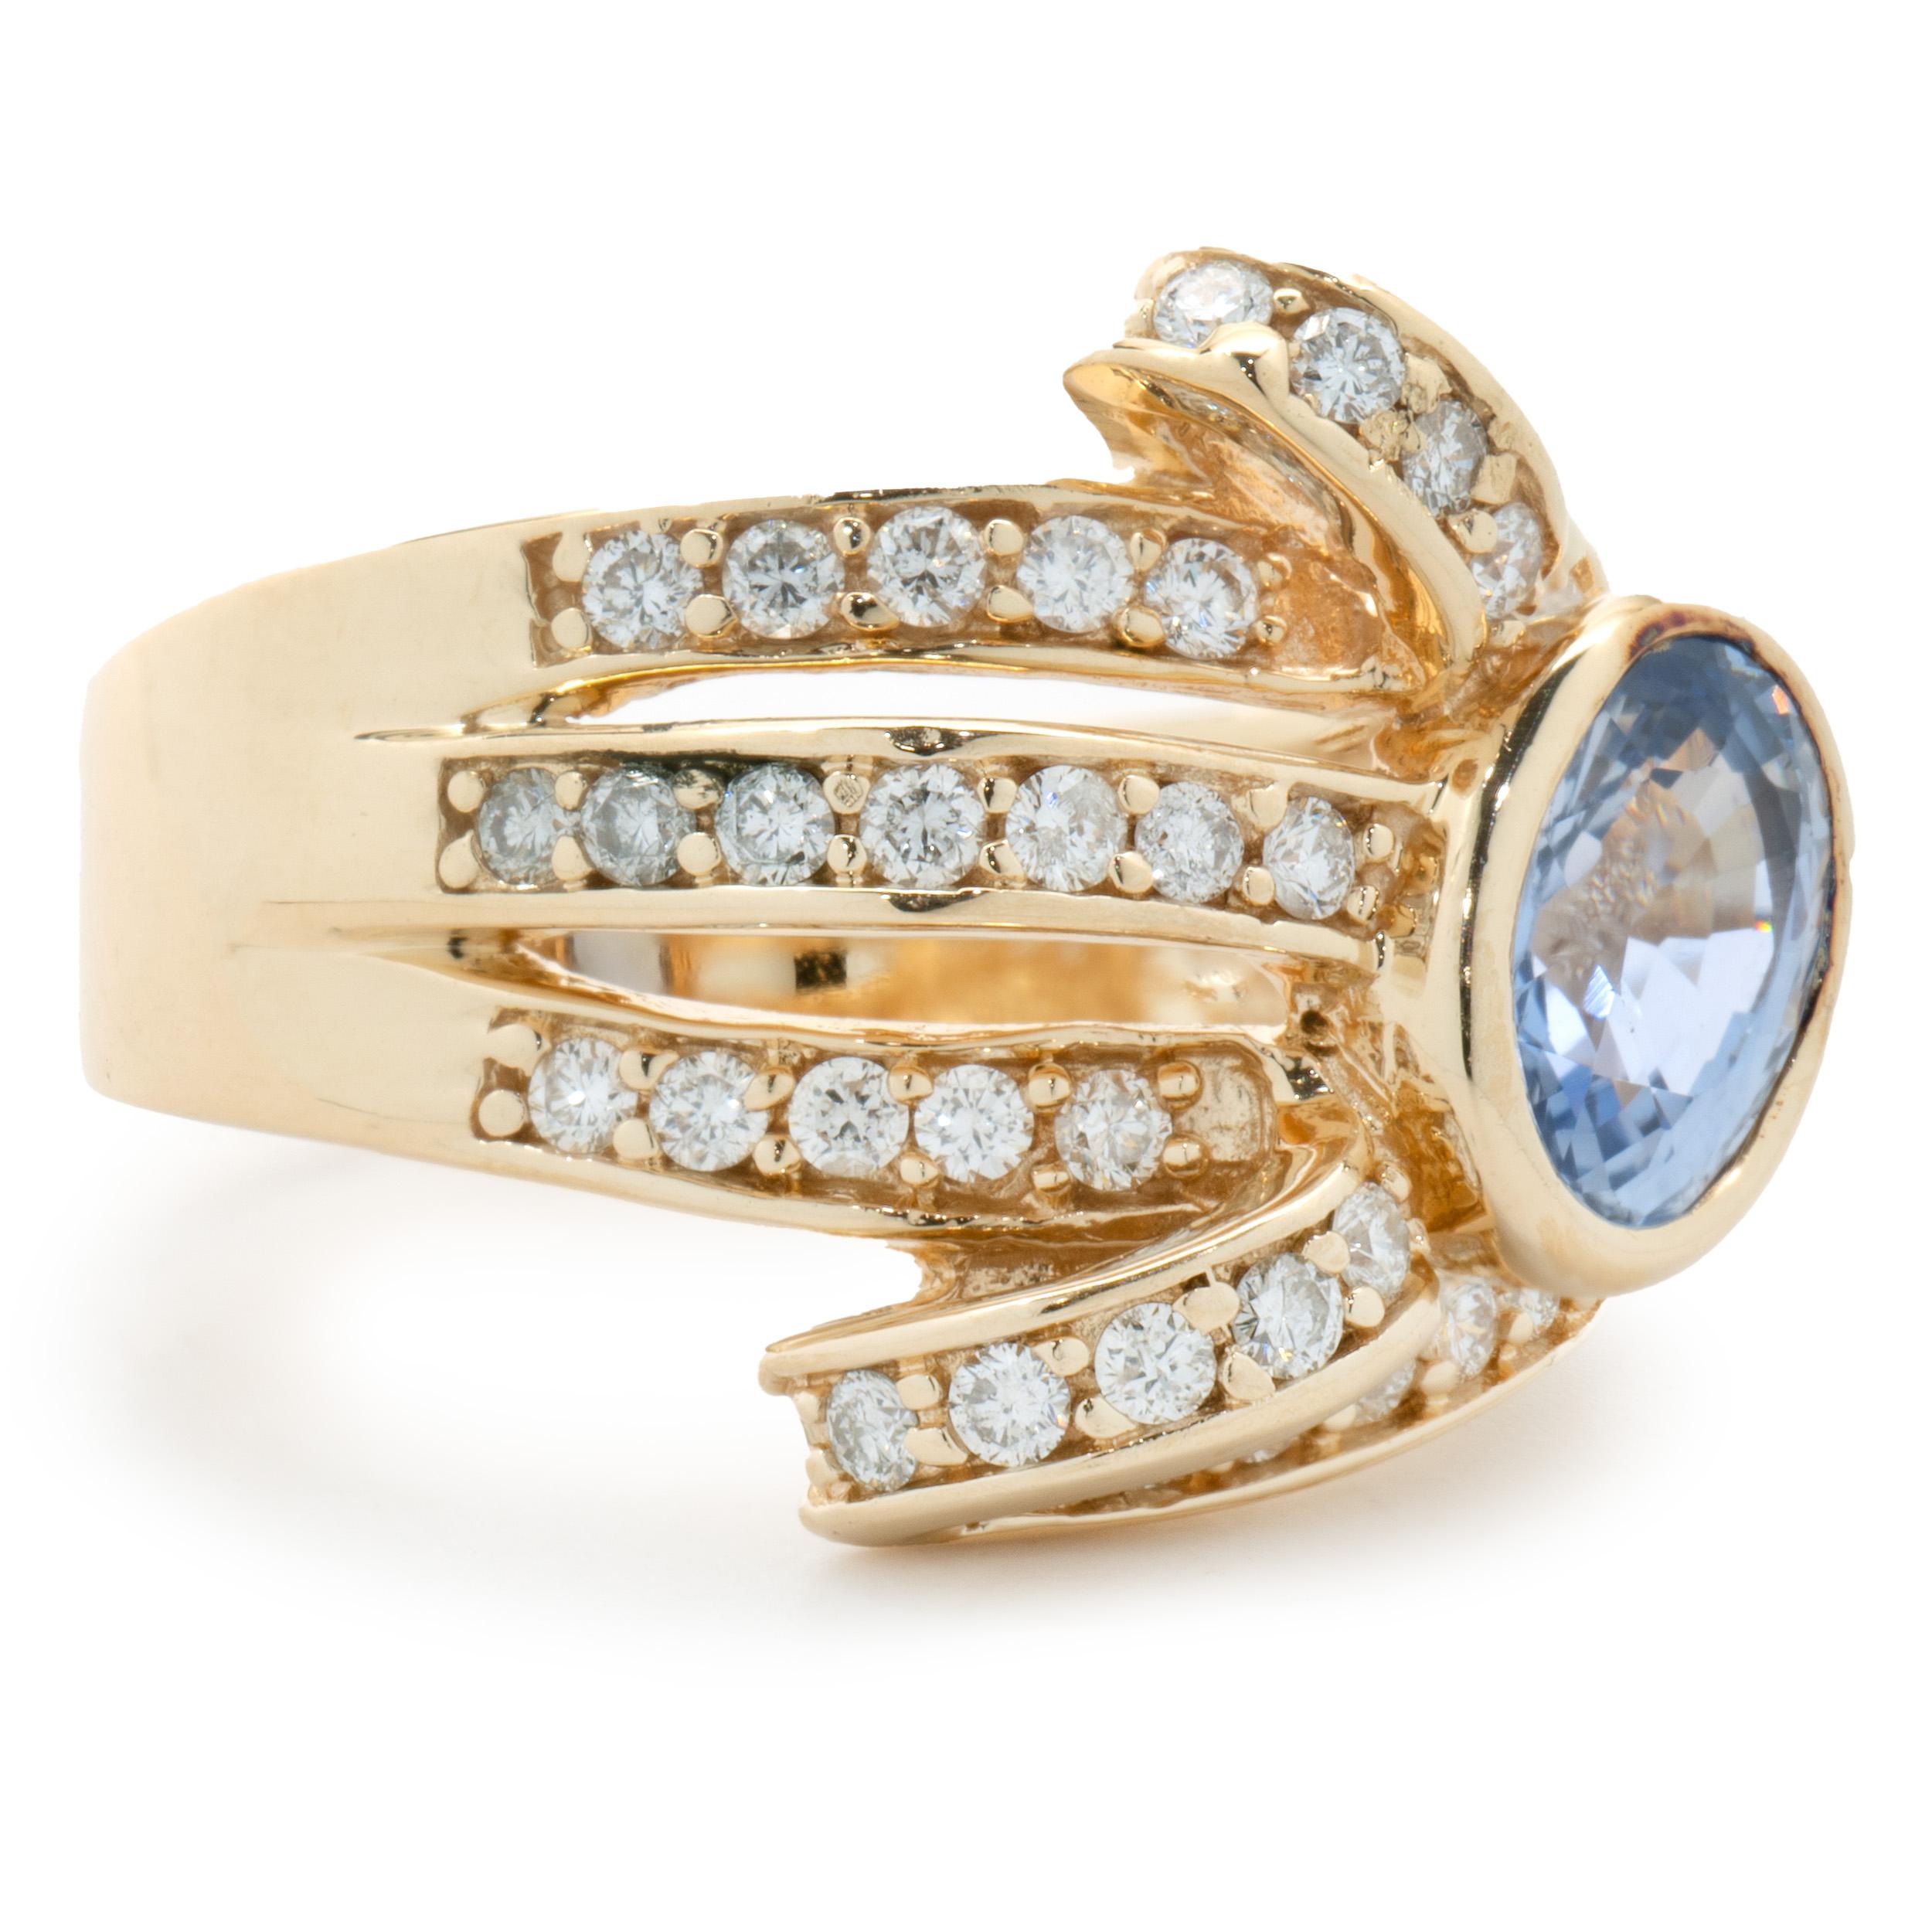 Designer: custom design
Material: 14K yellow gold
Diamond: 44 round brilliant cut = 0.66cttw
Color: H 
Clarity: SI1
Sapphire: 1 oval cut = 2.07ct
Dimensions: ring top measures 16.5mm wide
Ring Size: 7 (please allow two extra shipping days for sizing